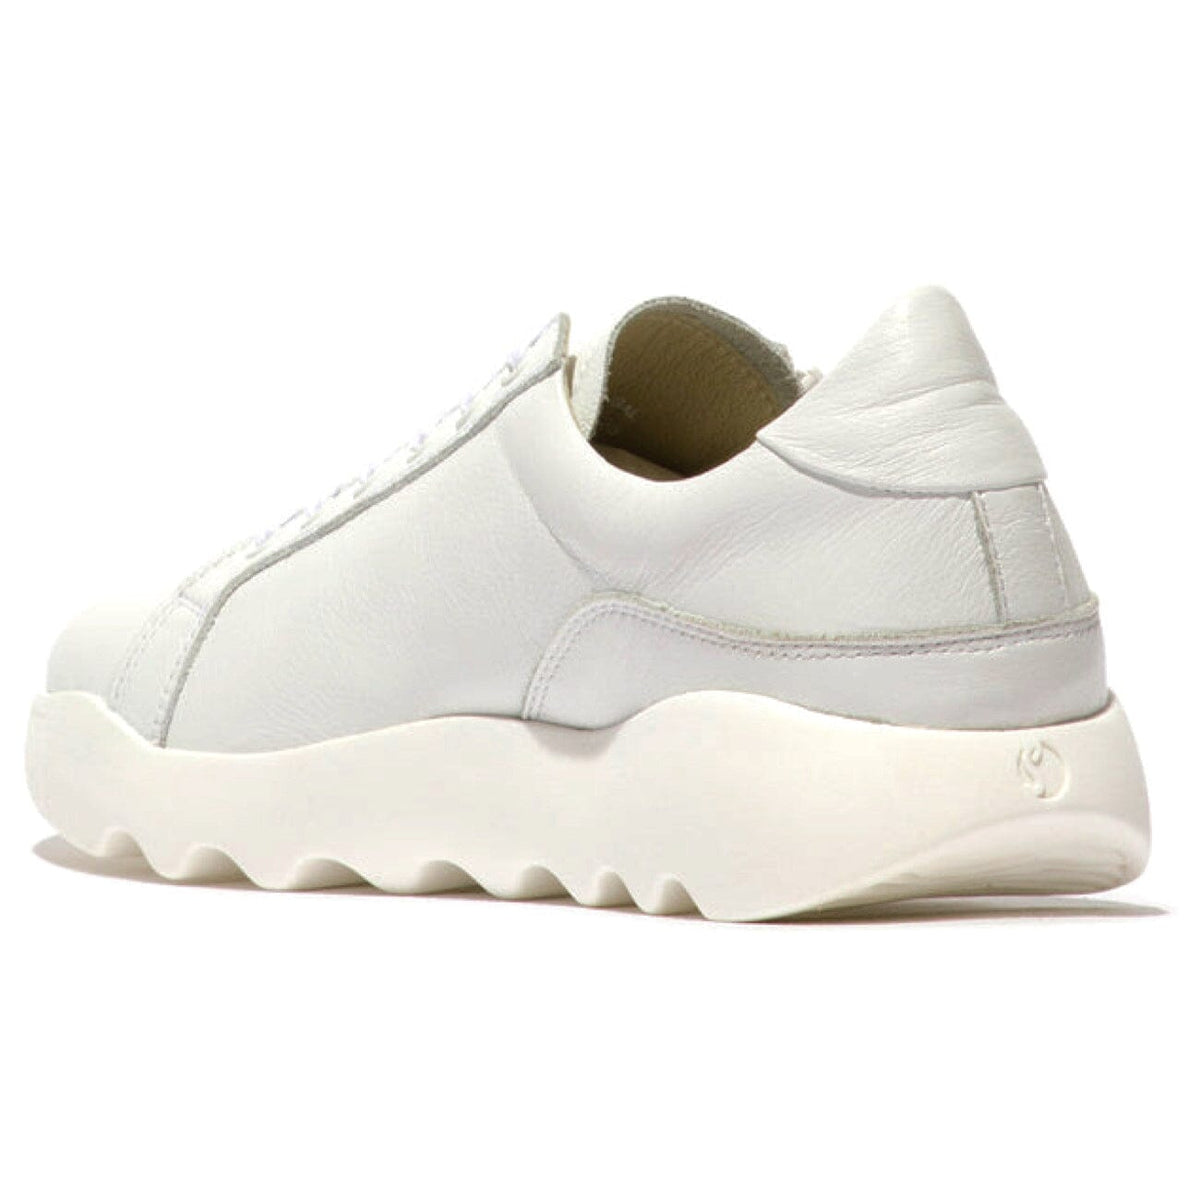 Softinos, Whiz719, Laceup Shoe, Smooth Leather, White Shoes Softinos 